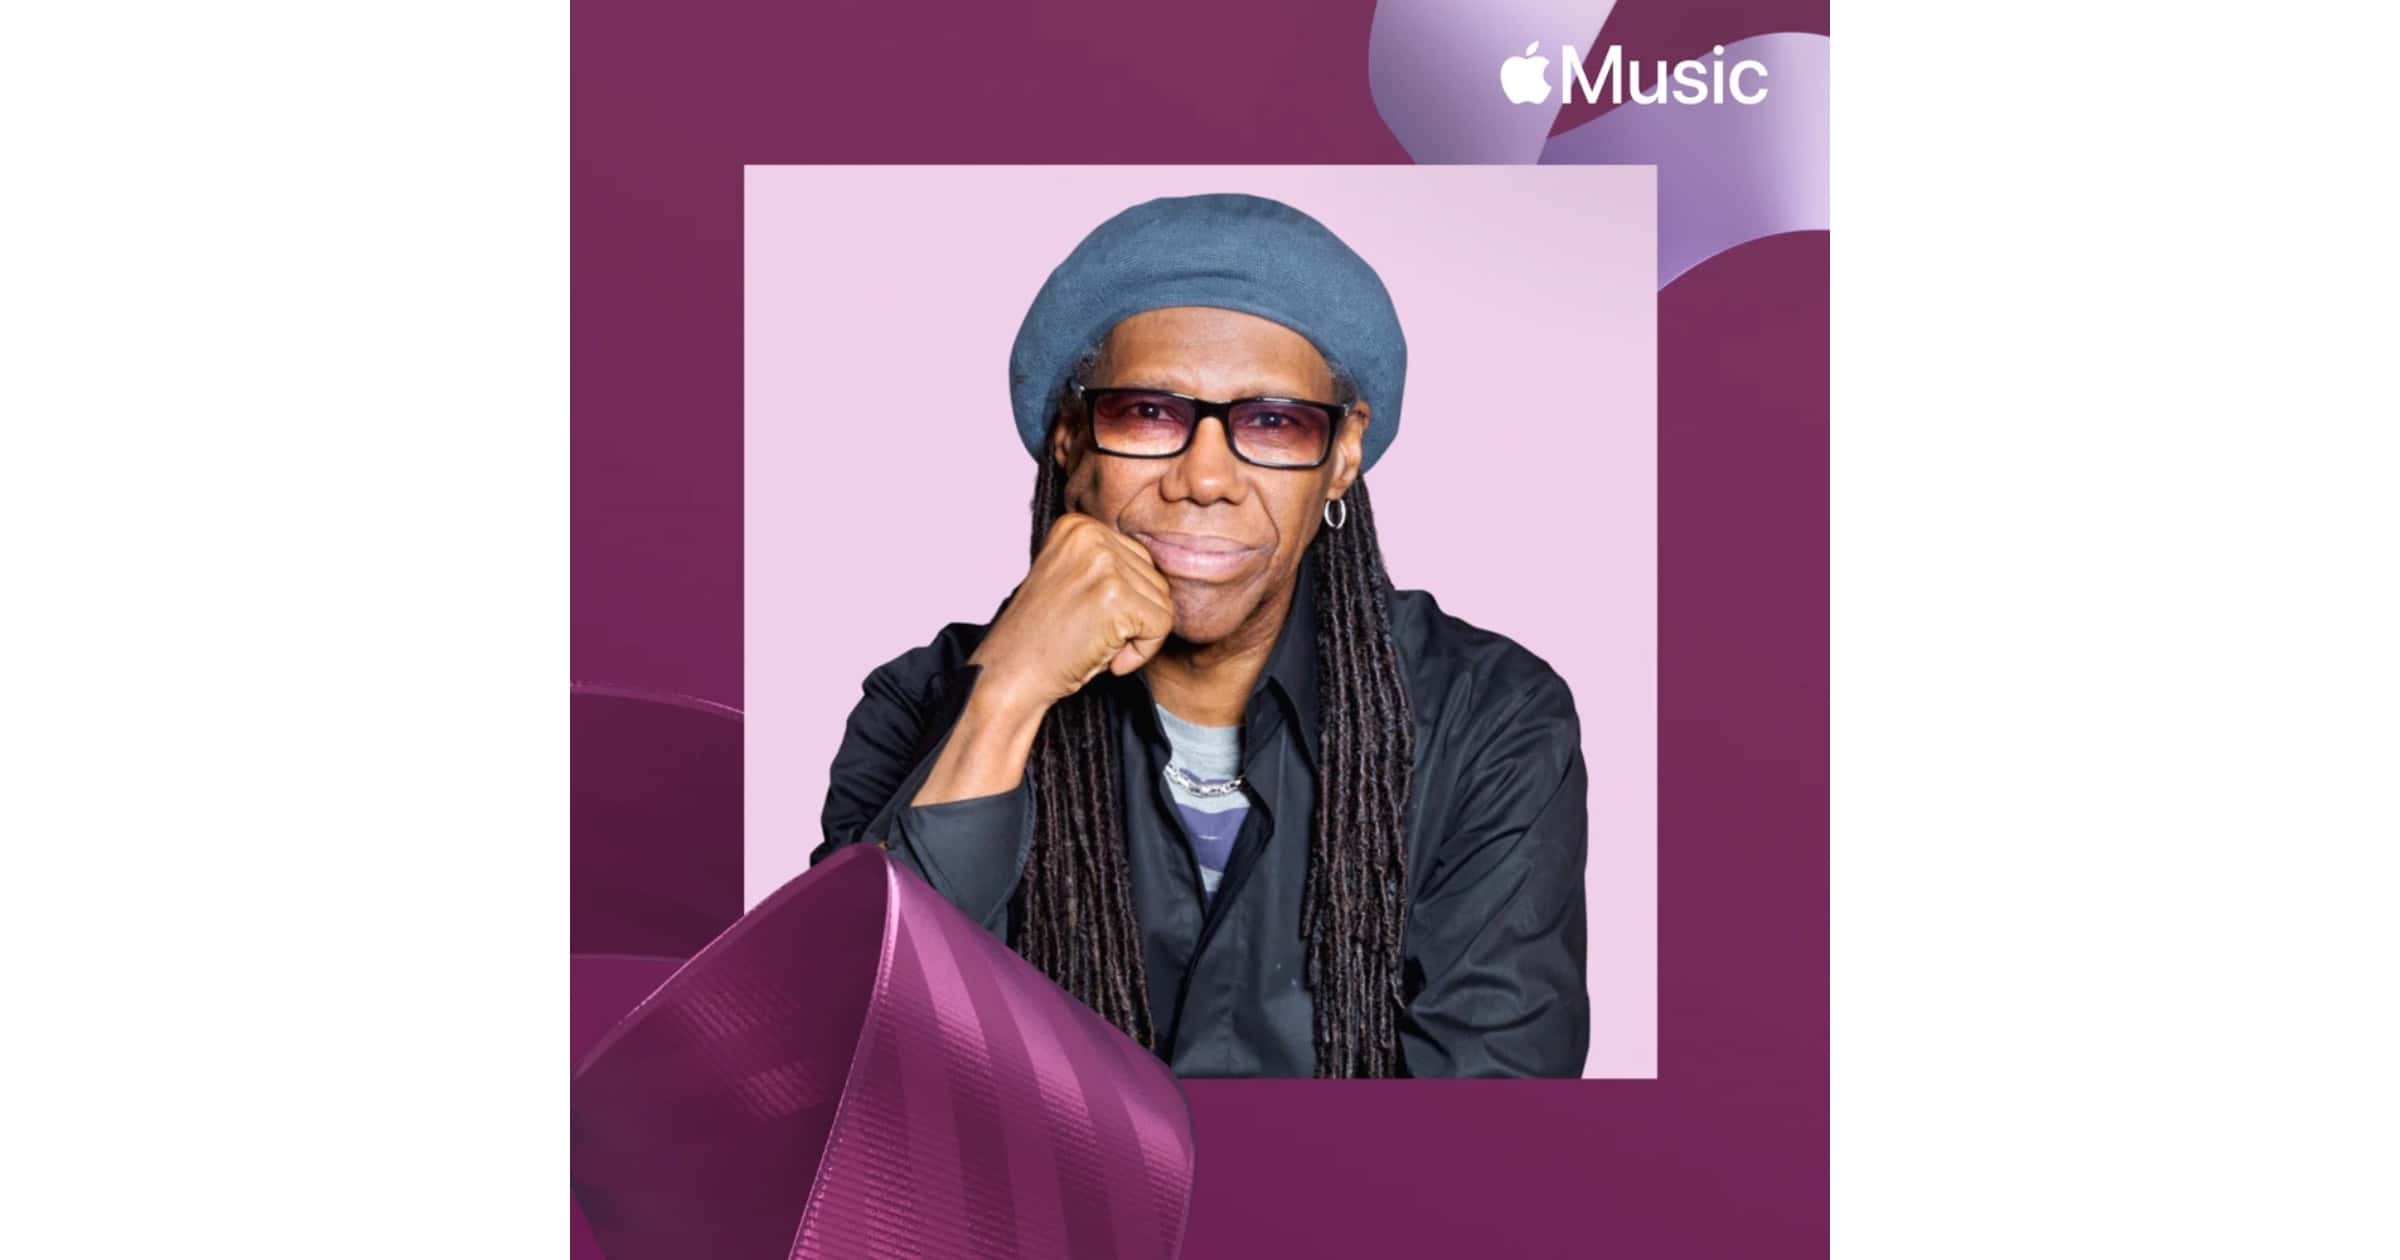 Apple Music Nile Rodgers Bedtime story